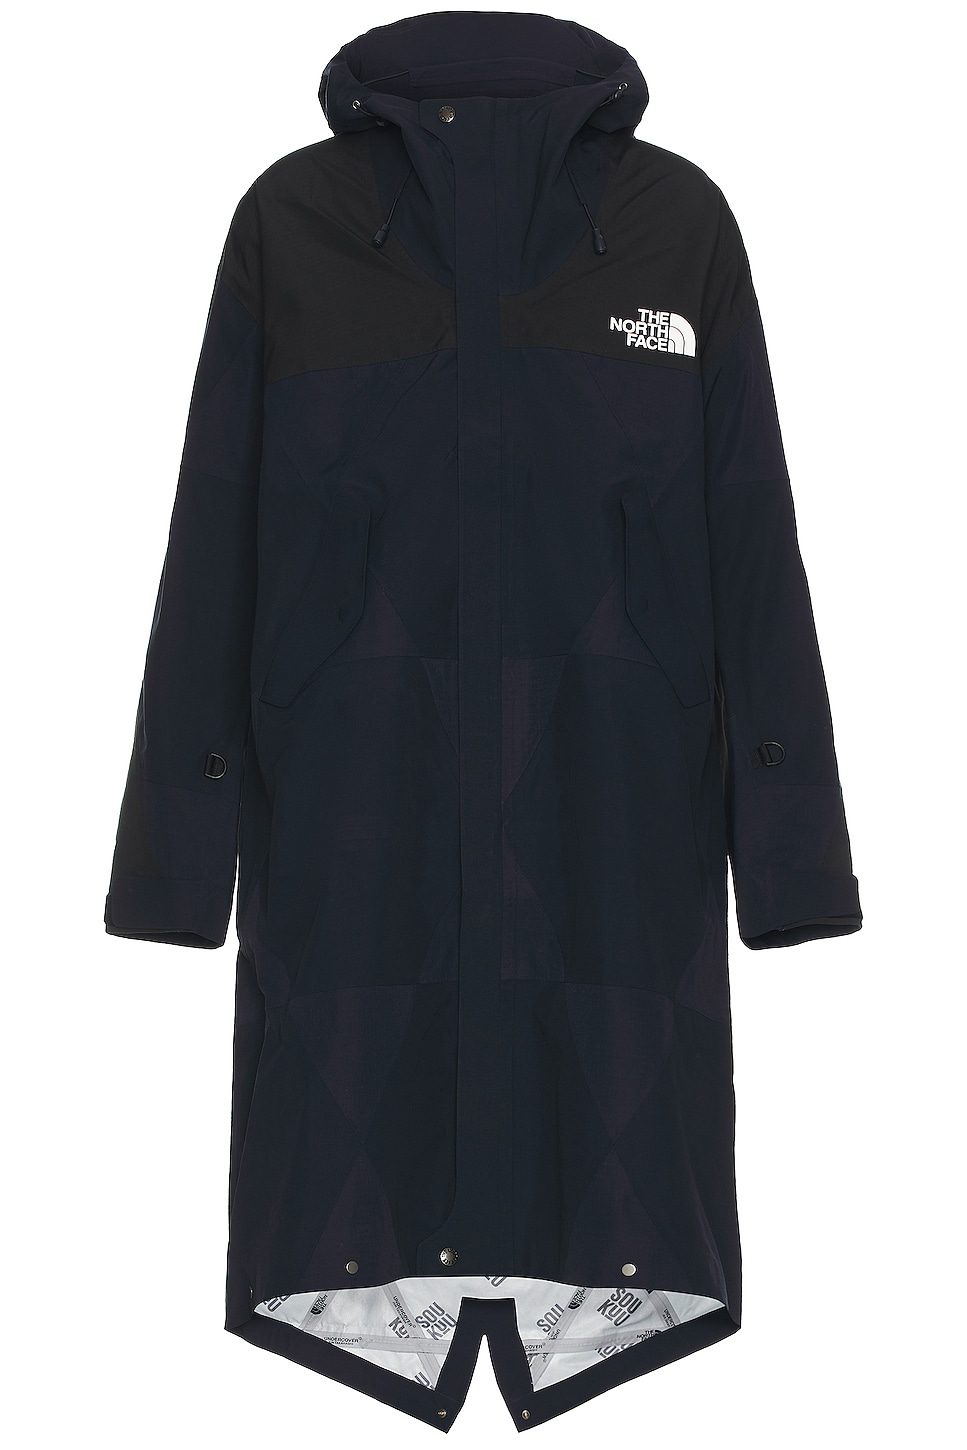 Image 1 of The North Face X Project U Geodesic Shell Jacket in Tnf Black & Aviator Navy